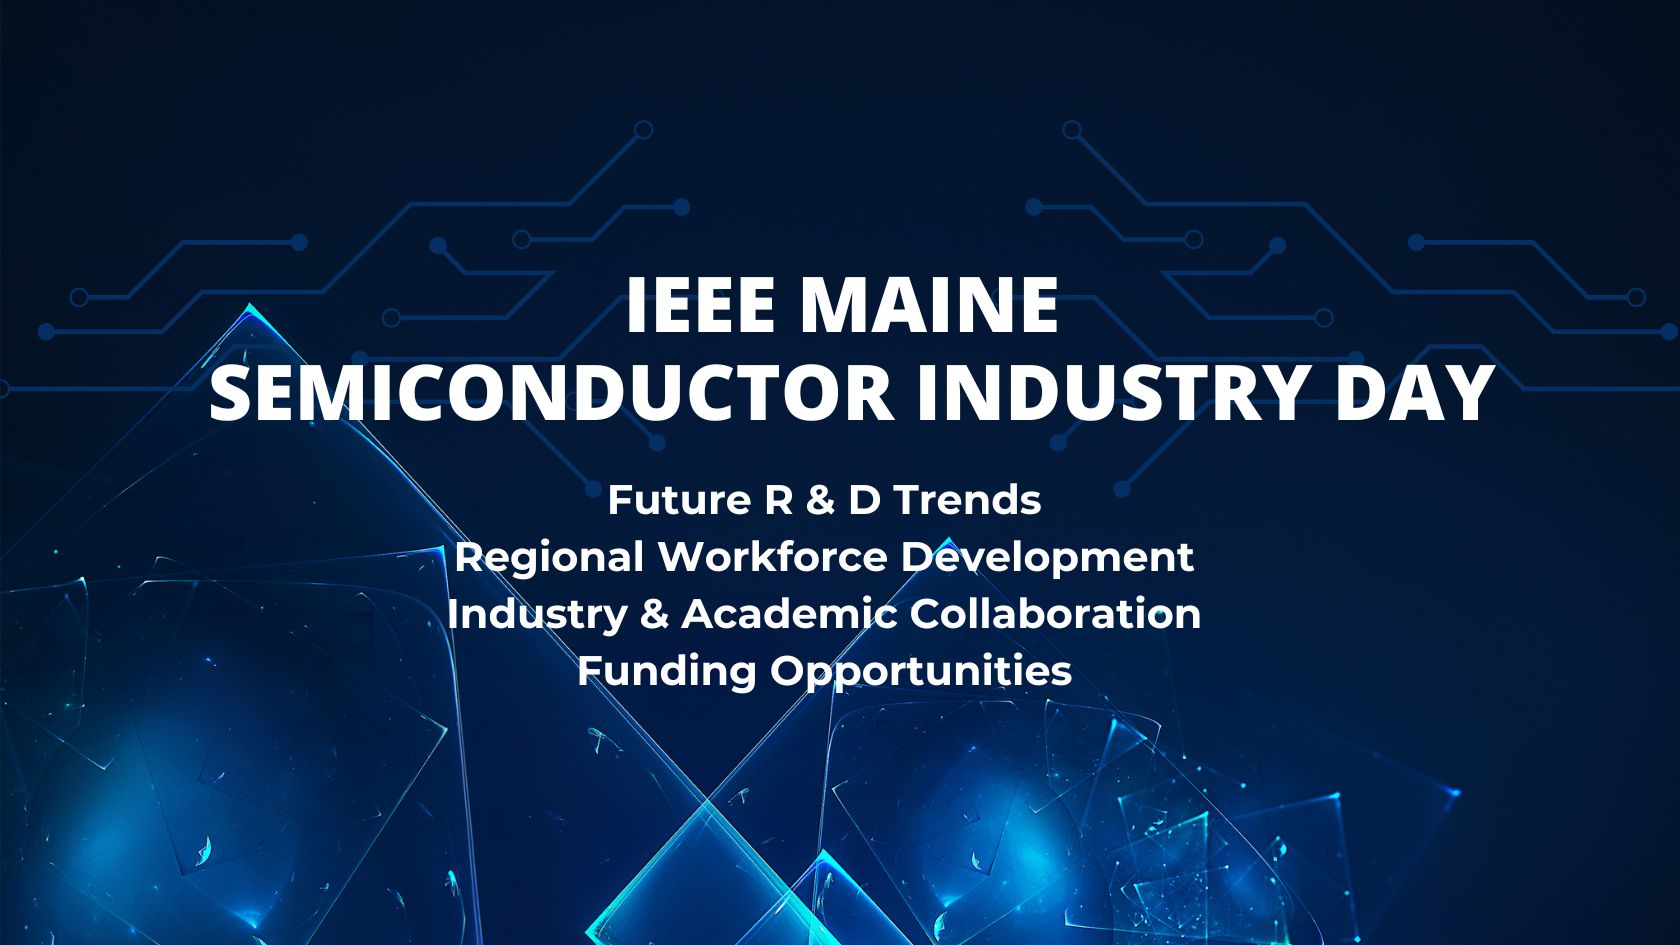 IEEE Maine Semiconductor Industry Day Future R&D trends regional workforce development industry & academic collaboration funding opportunities